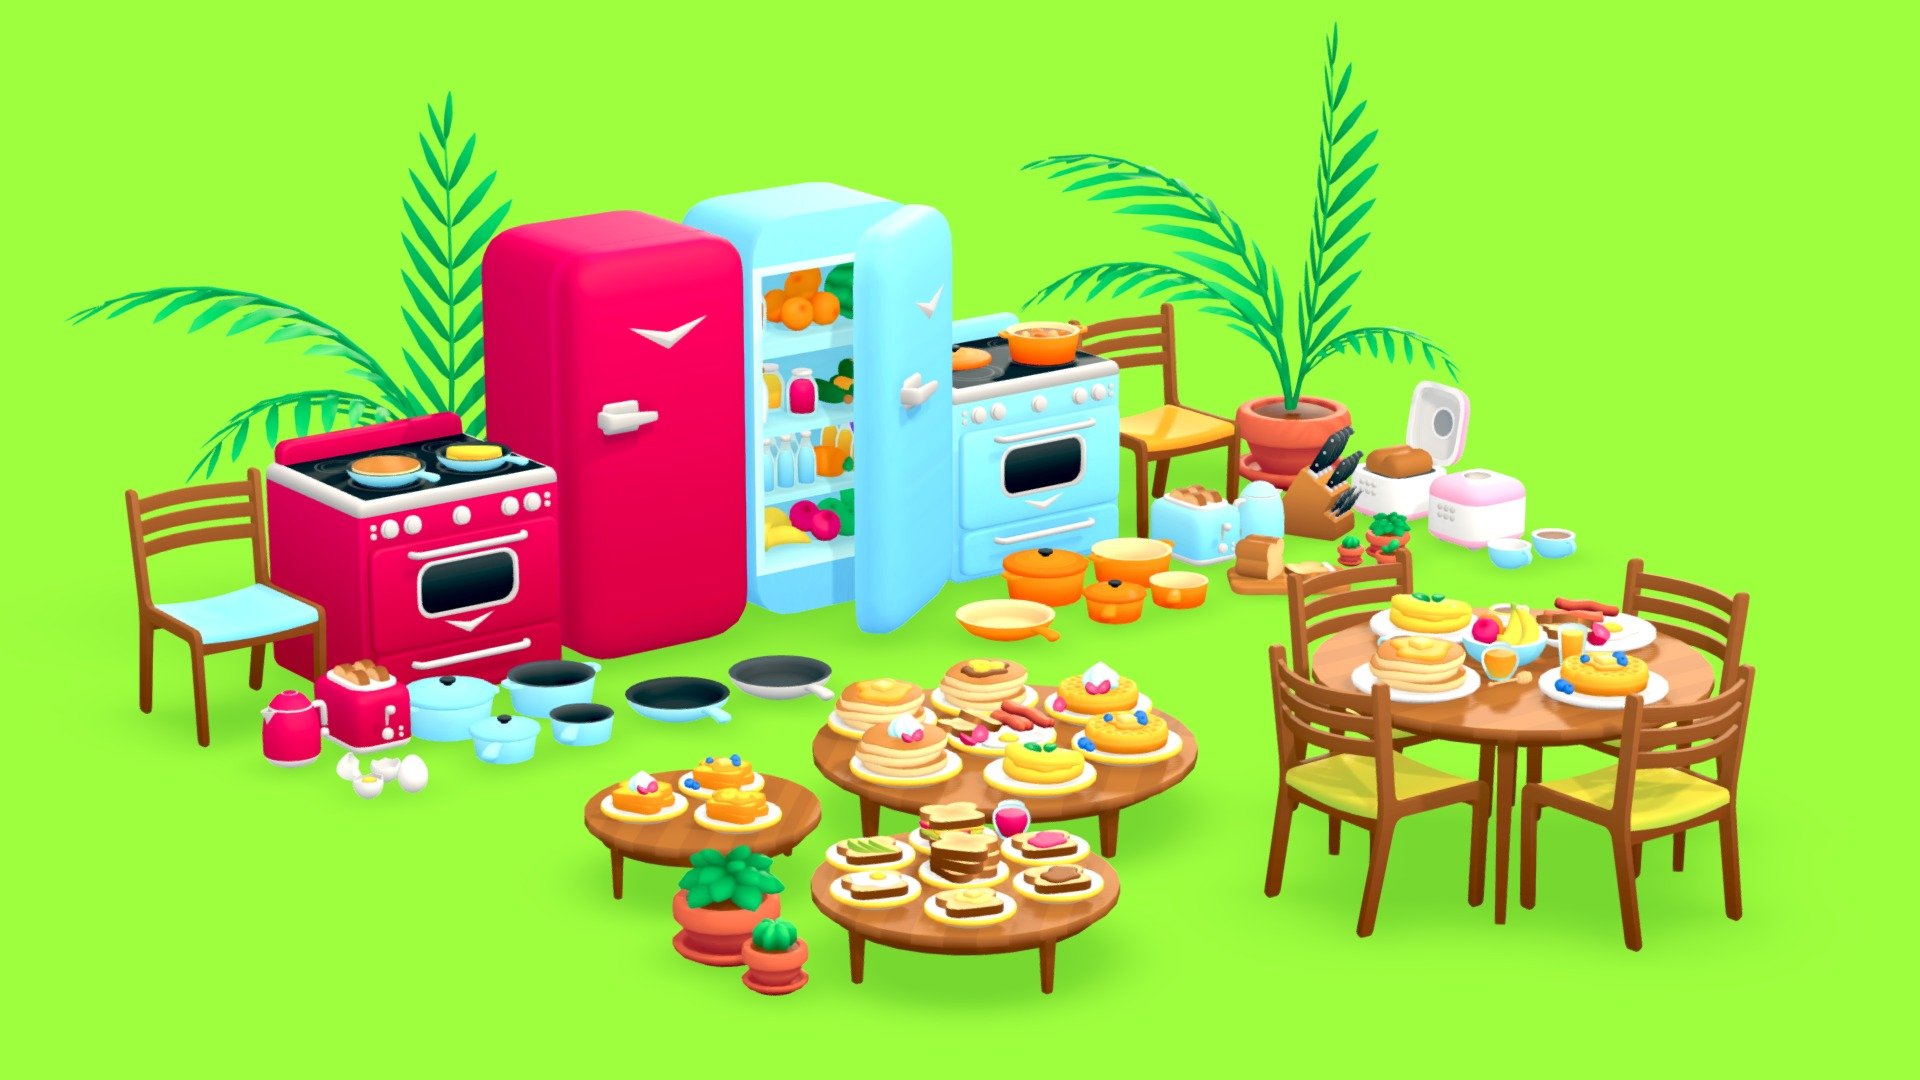 Here’s a new cartoon pack! I made this pack to fill your kitchen and your house!
You can use it for video games or animations!

Like my other packs in the same style, this scene is using a single texture map and is mapped using only color gradients.
It includes all the assets you see as separated fbx

If you want to complete your kitchen scene with more food and objects, take a look at my other packs on sale! I have some other packs in the same style like this:




https://sketchfab.com/3d-models/beach-party-pack-0e08b54d2040497e9597bd220e1f0e82

https://sketchfab.com/3d-models/living-room-pack-fa6fbd9cf1f44bcf806d633b345add01

https://sketchfab.com/3d-models/breakfast-food-pack-b42606de1a4549768c6db93cd63dbcb5

If you want custom models for your project, contact me! I’m currently taking freelance jobs :D

Leave a comment and let me know what 3D pack you’d like to see next! - Kitchen Pack - Buy Royalty Free 3D model by L3X 3d model